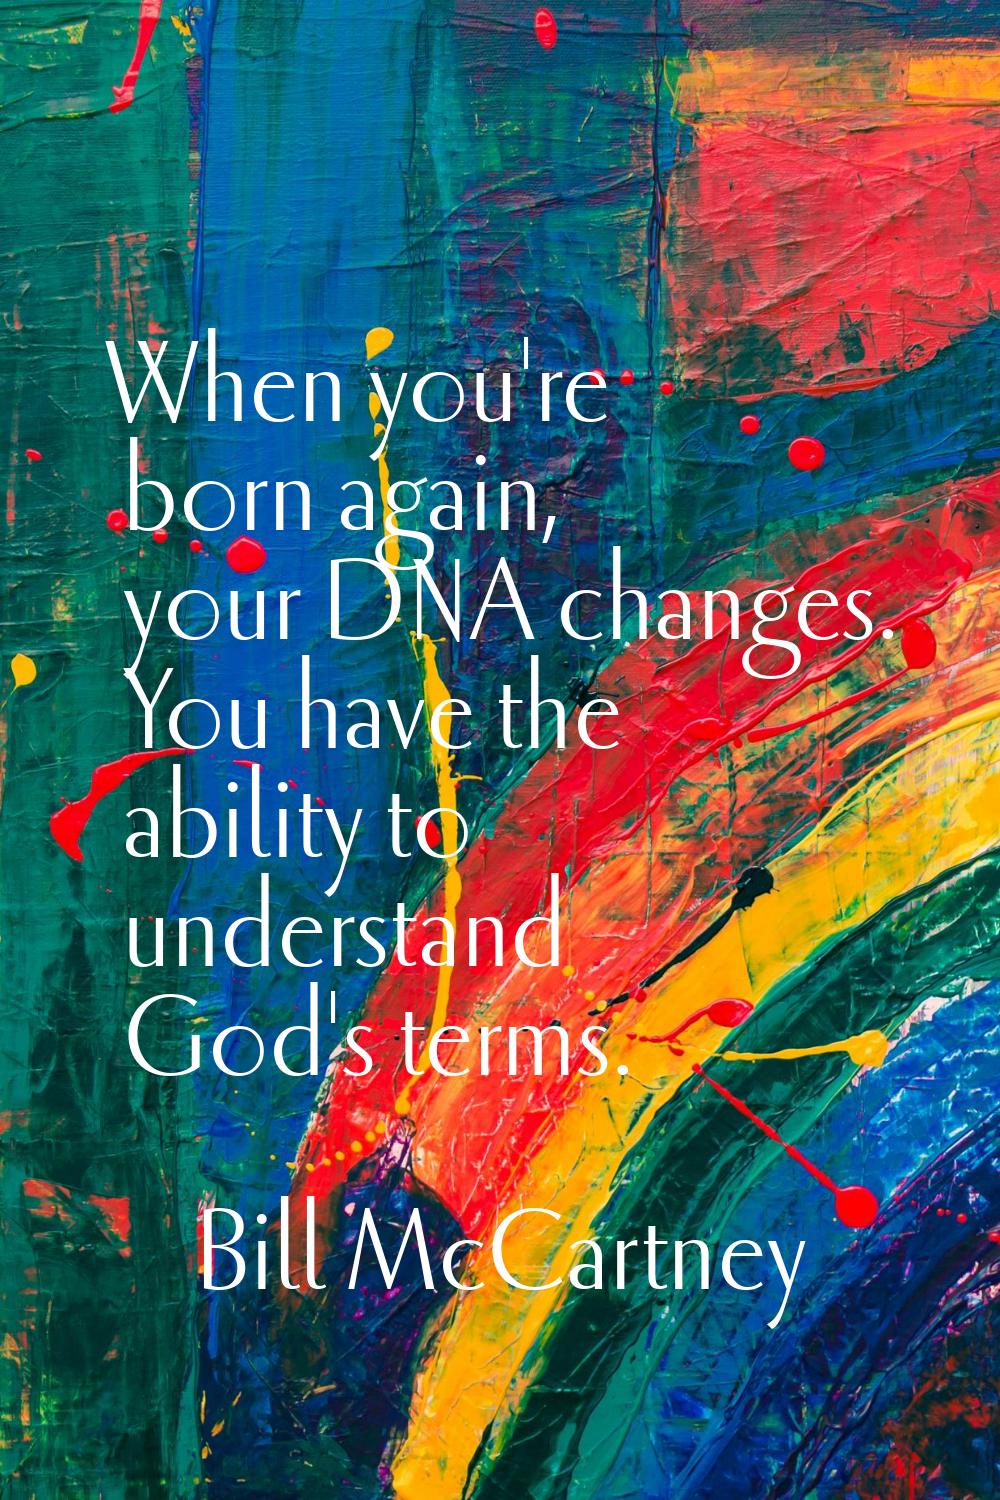 When you're born again, your DNA changes. You have the ability to understand God's terms.